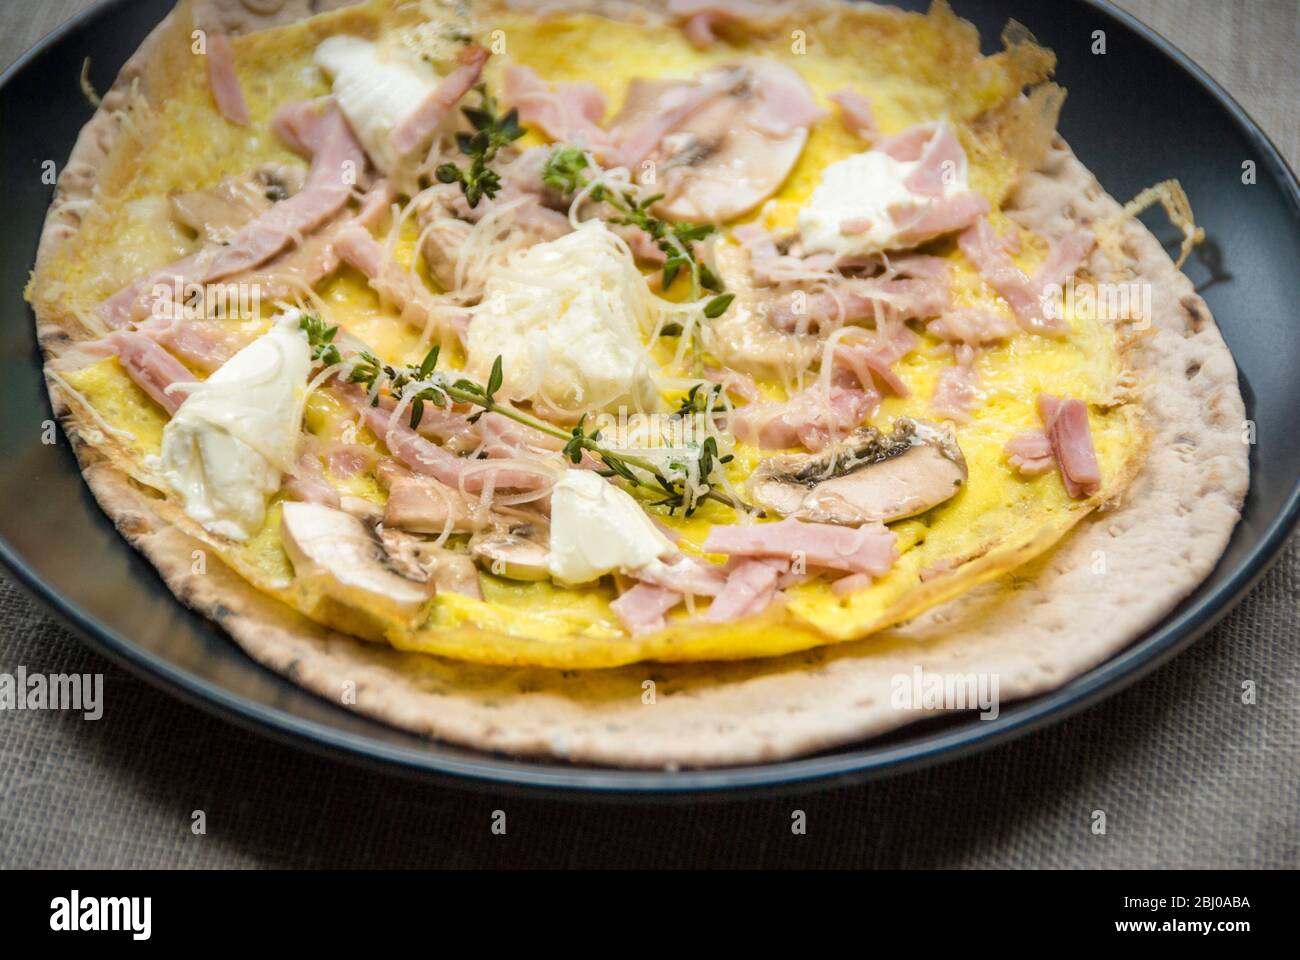 Thin pancake style omelette with mushroom, ham, goat's cheese and parmesan on thin Swedish bread before being rolled up, as a portable breakfast. Stock Photo